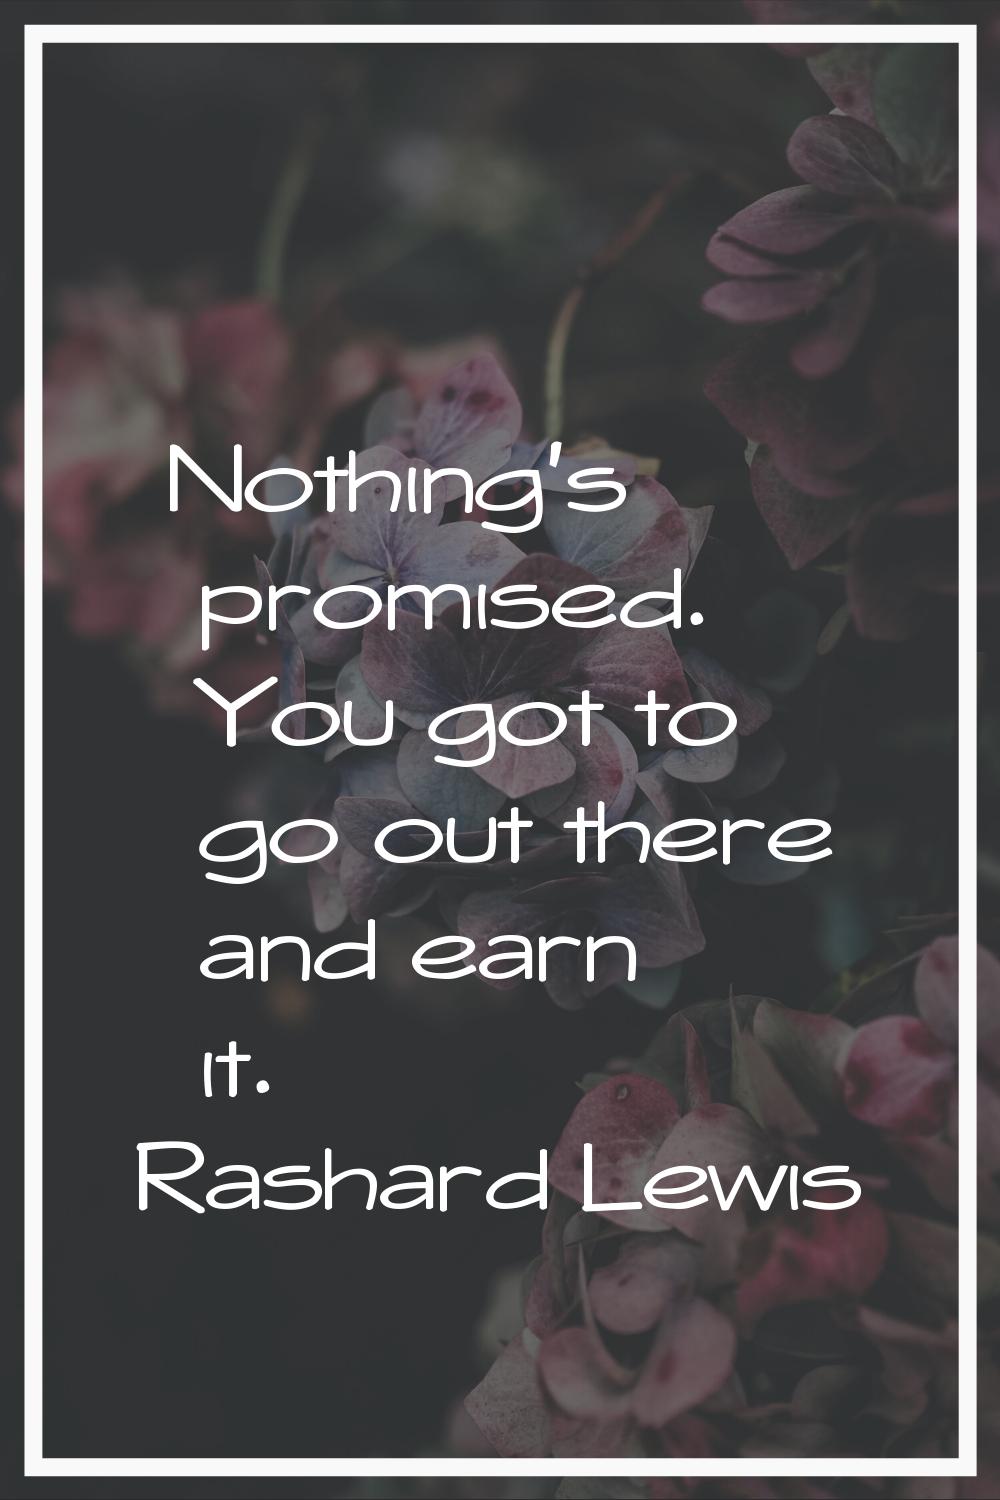 Nothing's promised. You got to go out there and earn it.